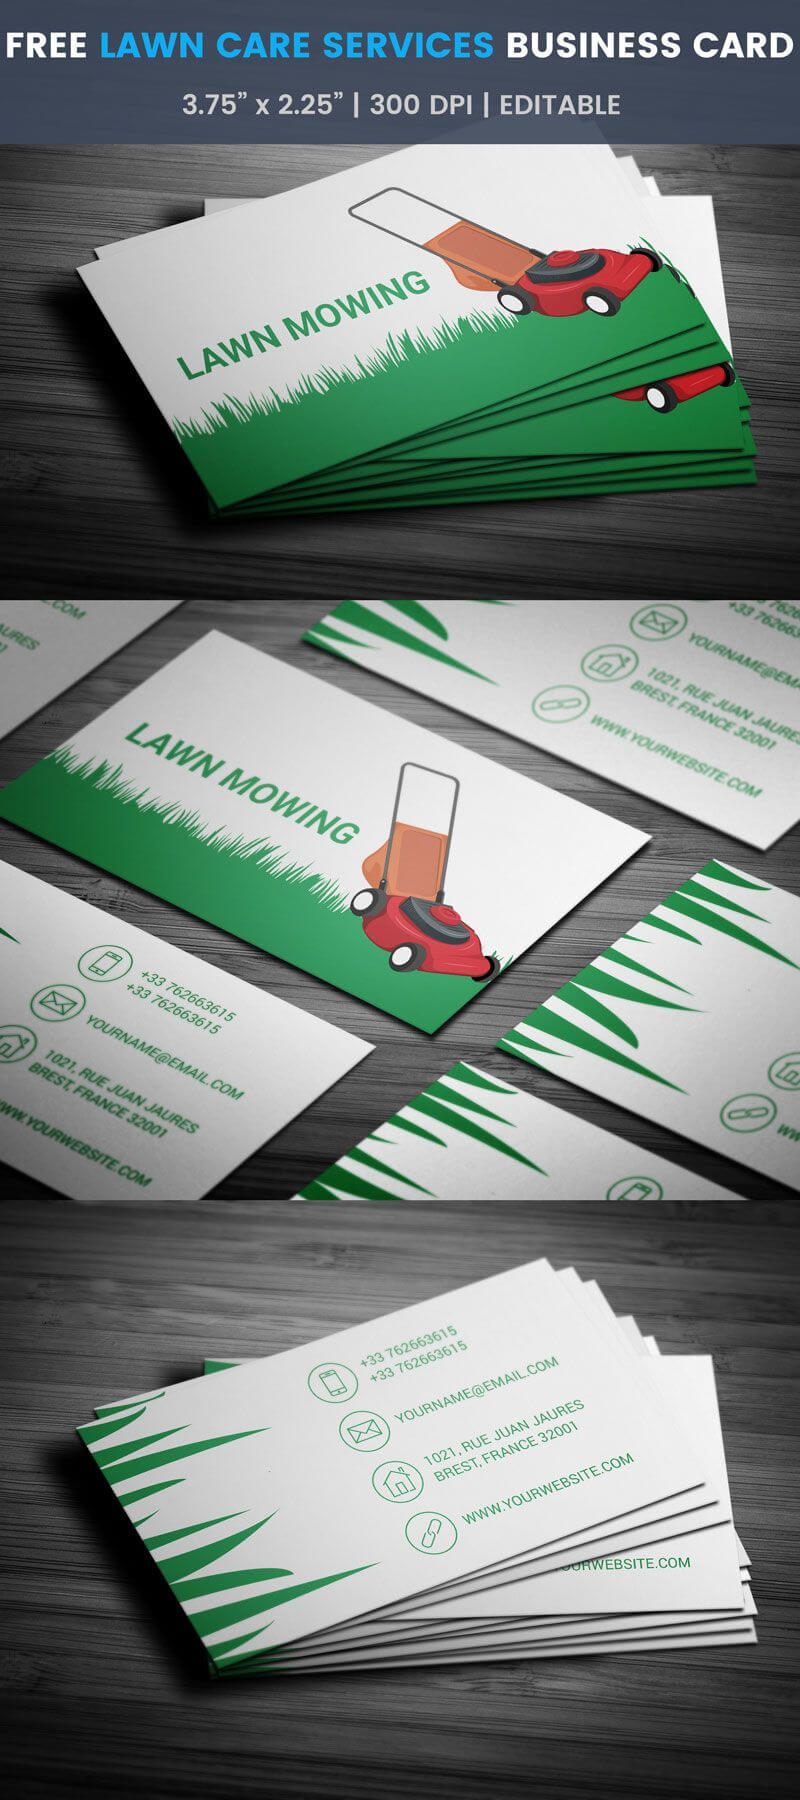 Lawn Care Services Business Card - Full Preview | Free Intended For Lawn Care Business Cards Templates Free